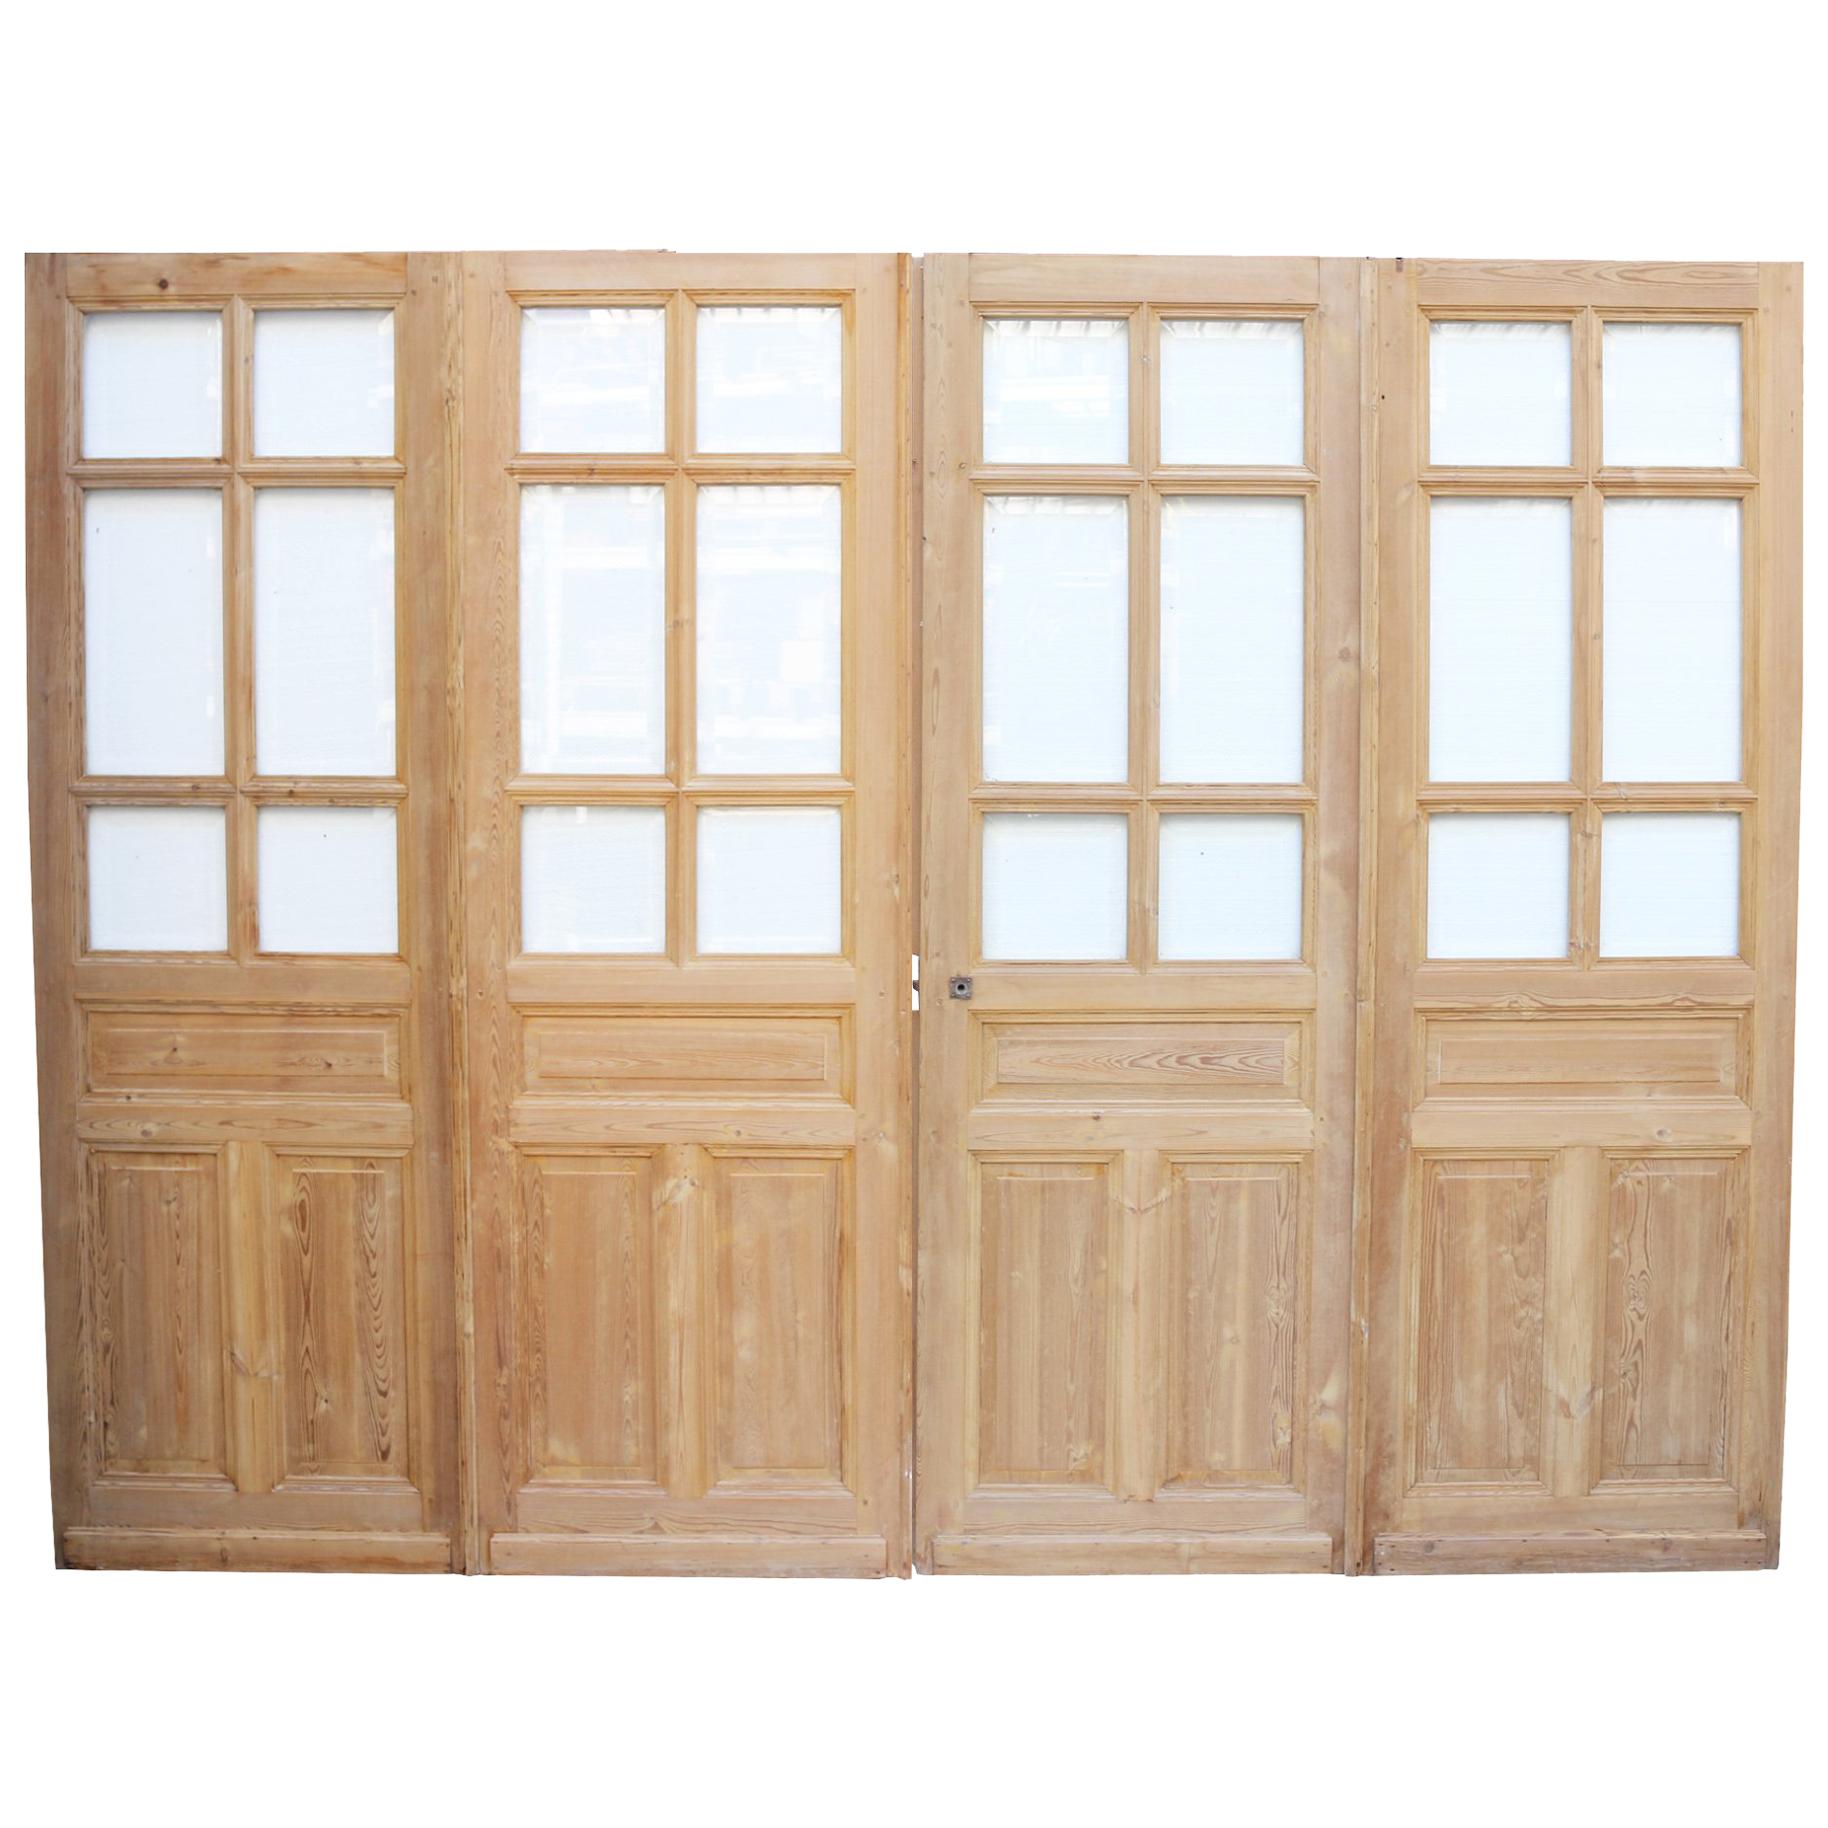 Set of Four Pine Room Dividers